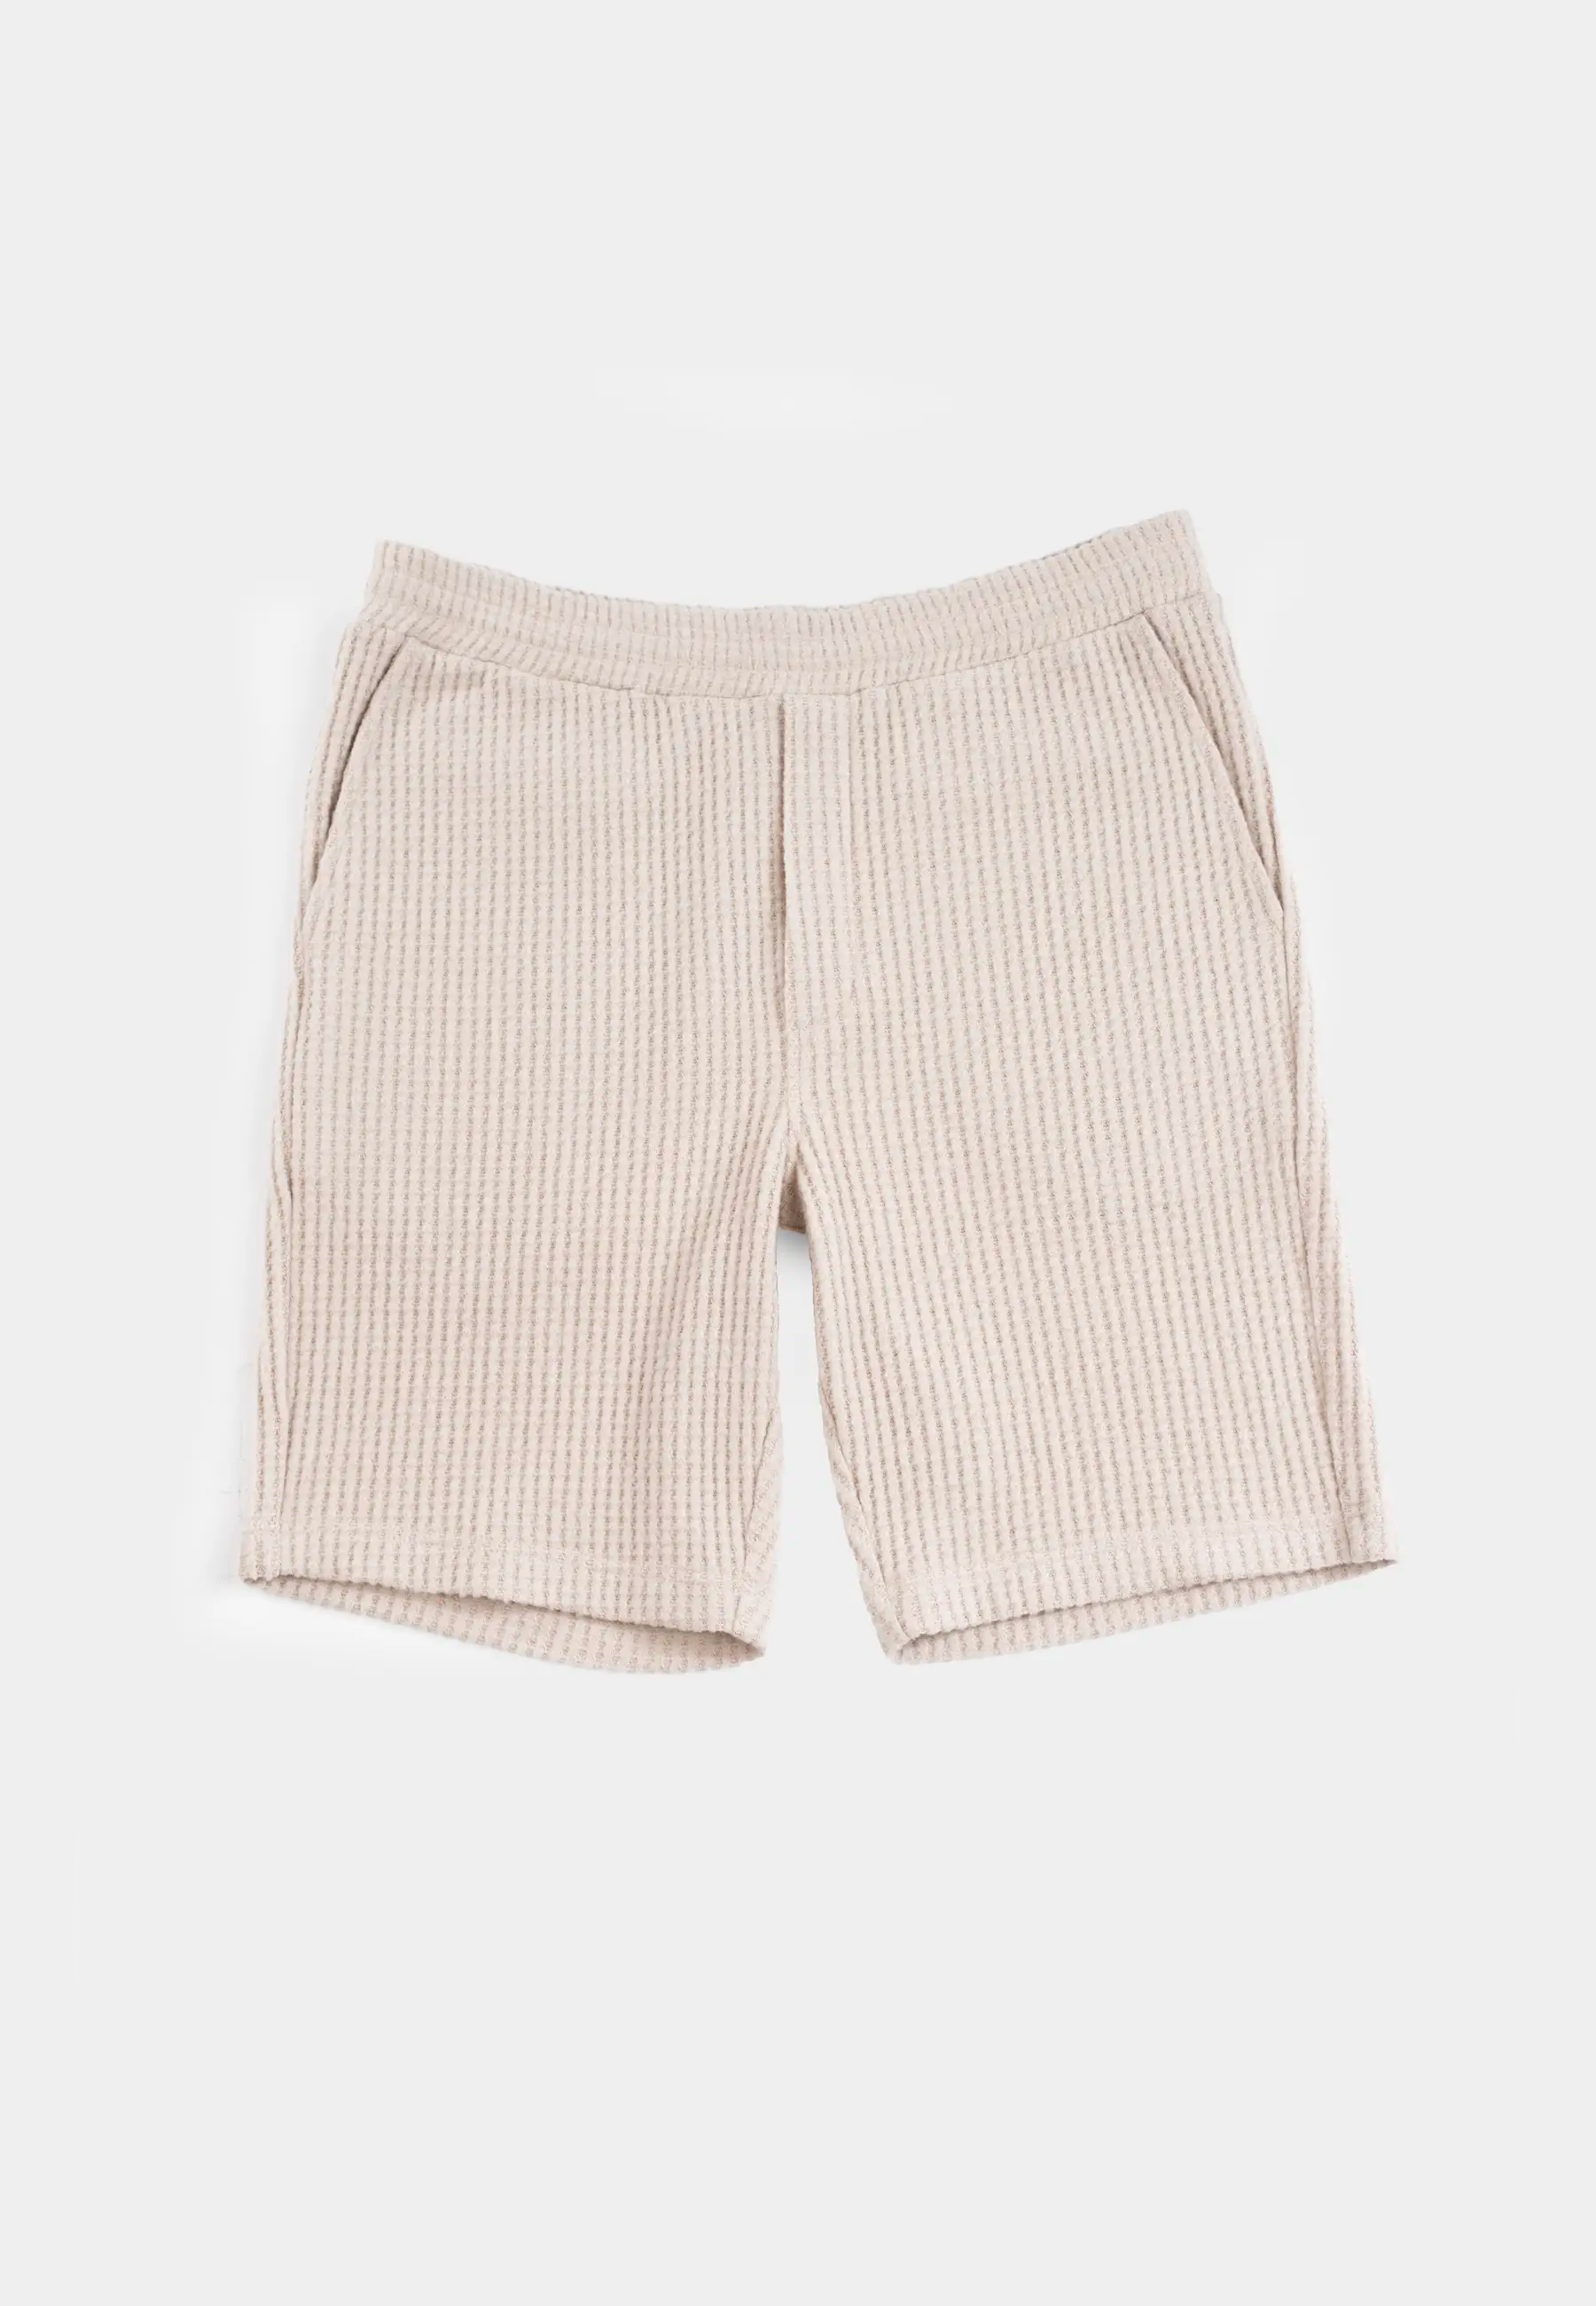 Mian knitted shorts - Oyster